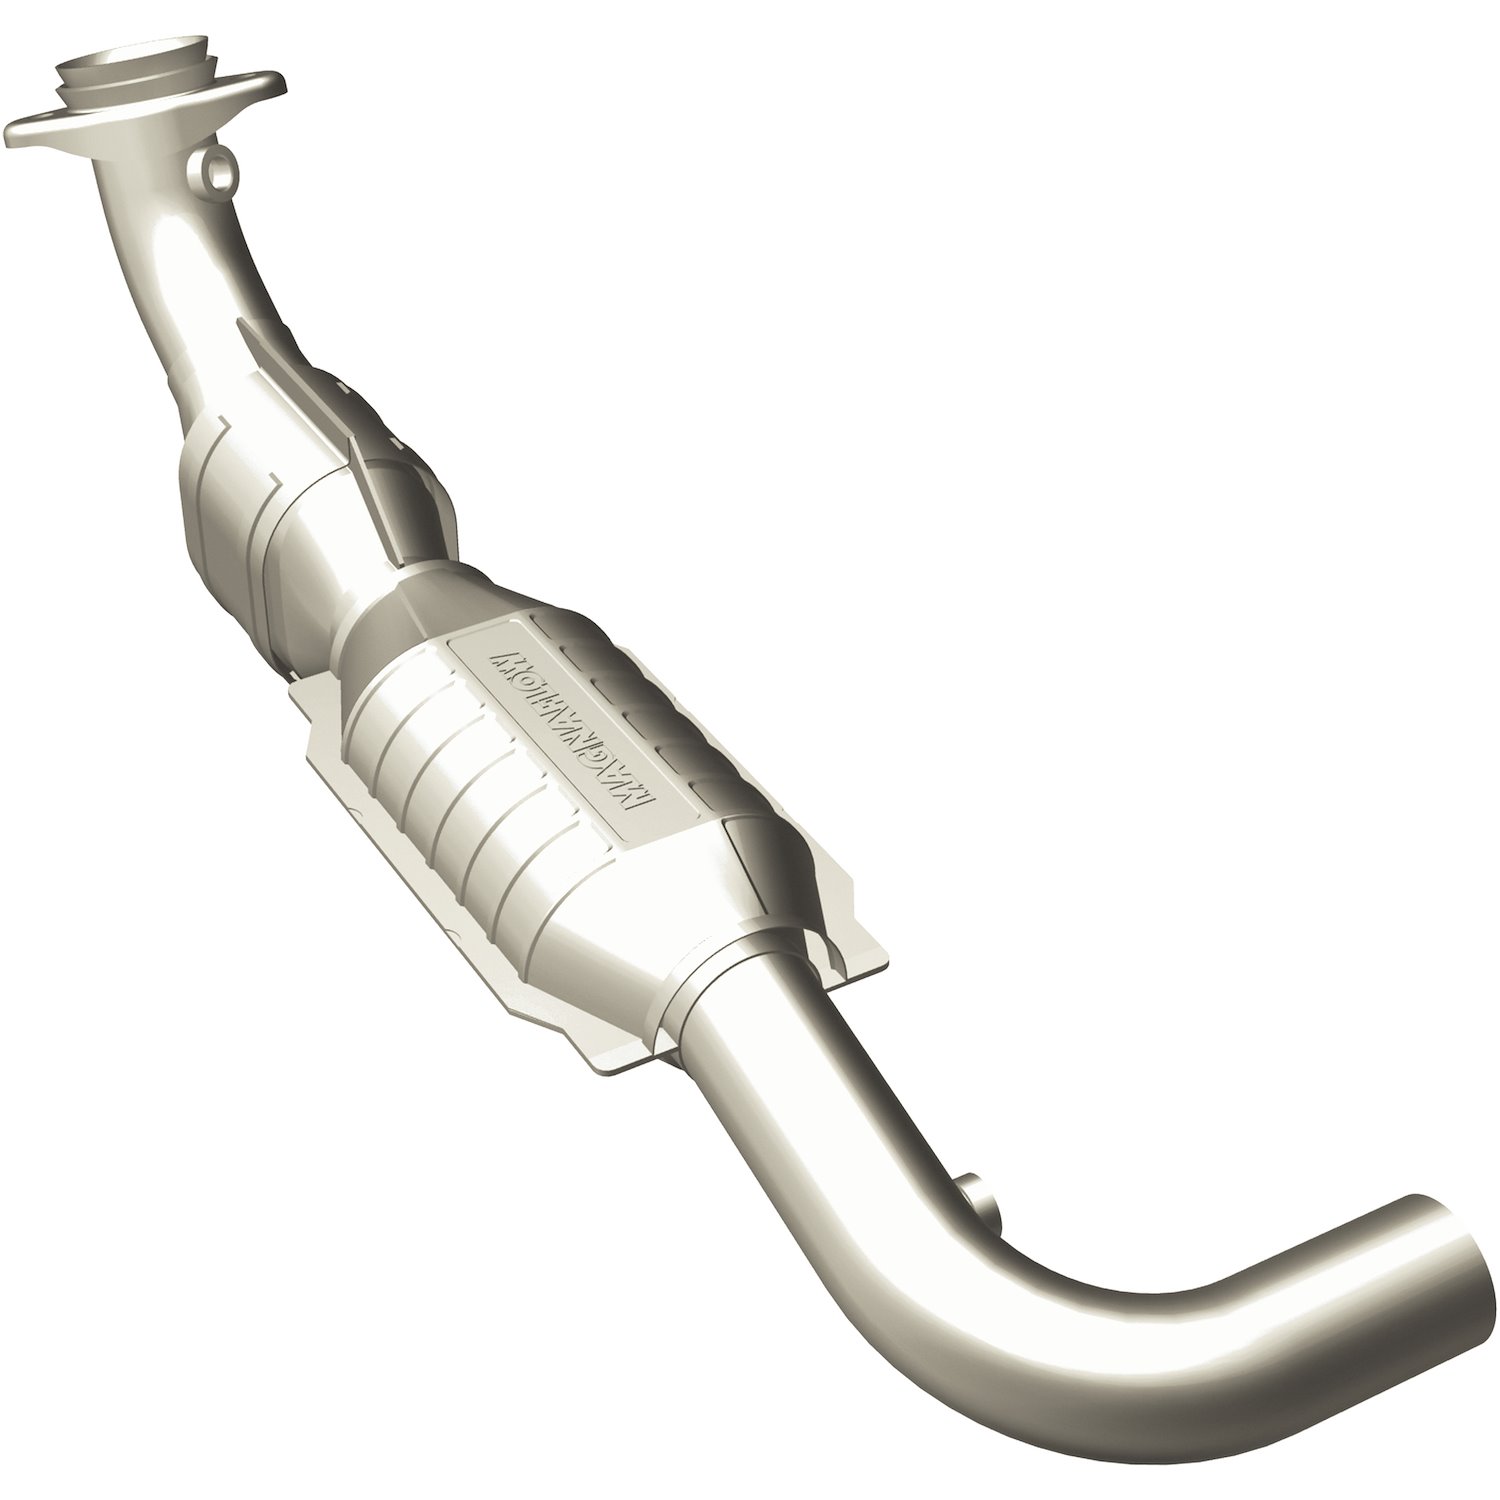 OEM Grade Federal / EPA Compliant Direct-Fit Catalytic Converter 49621